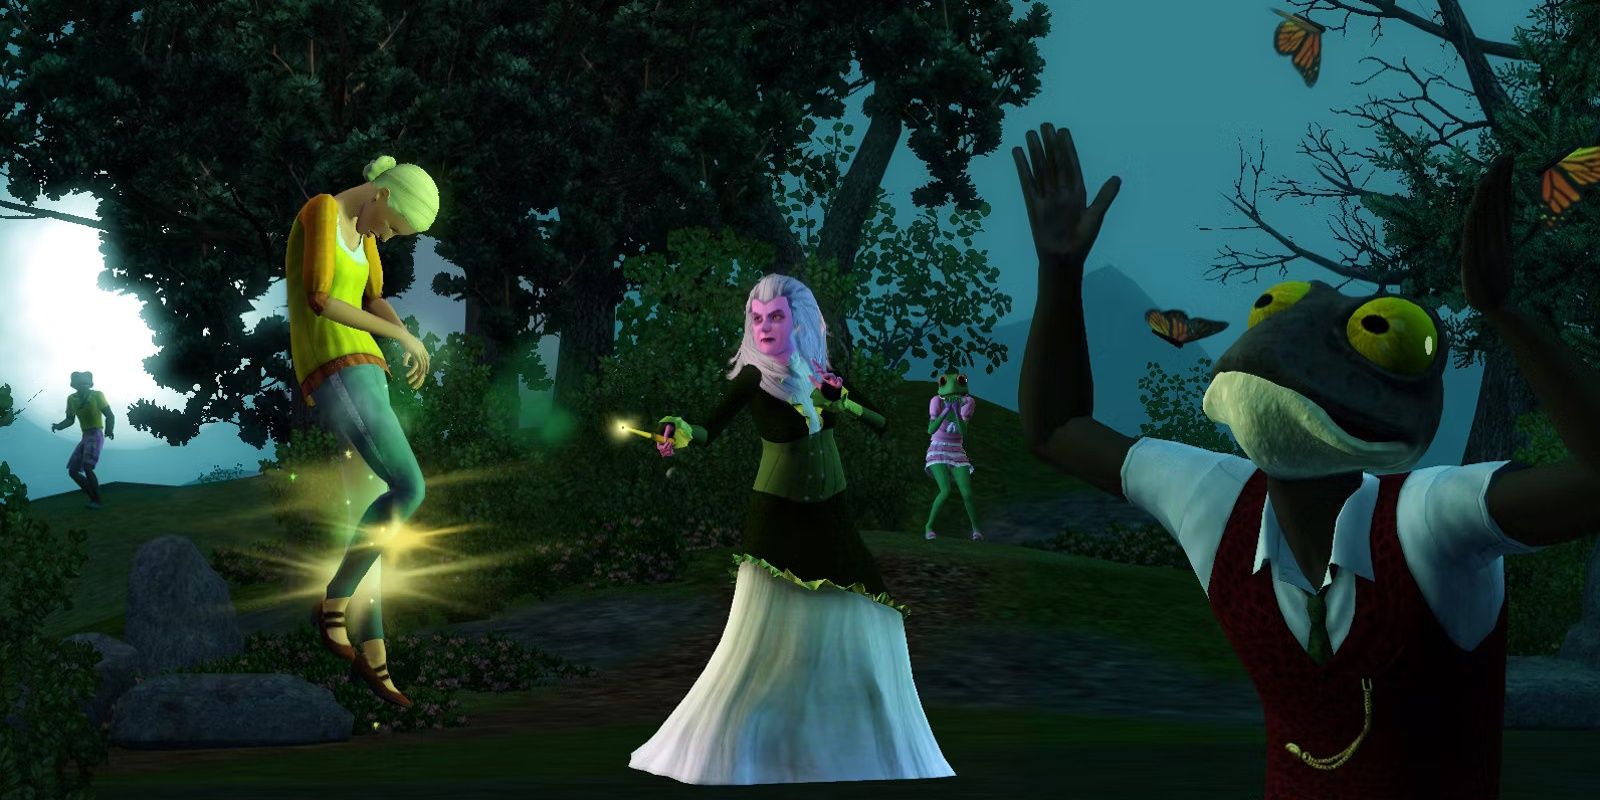 A witch casts a spell on an unsuspecting Sim, while another looks frightened after being turned into a toad